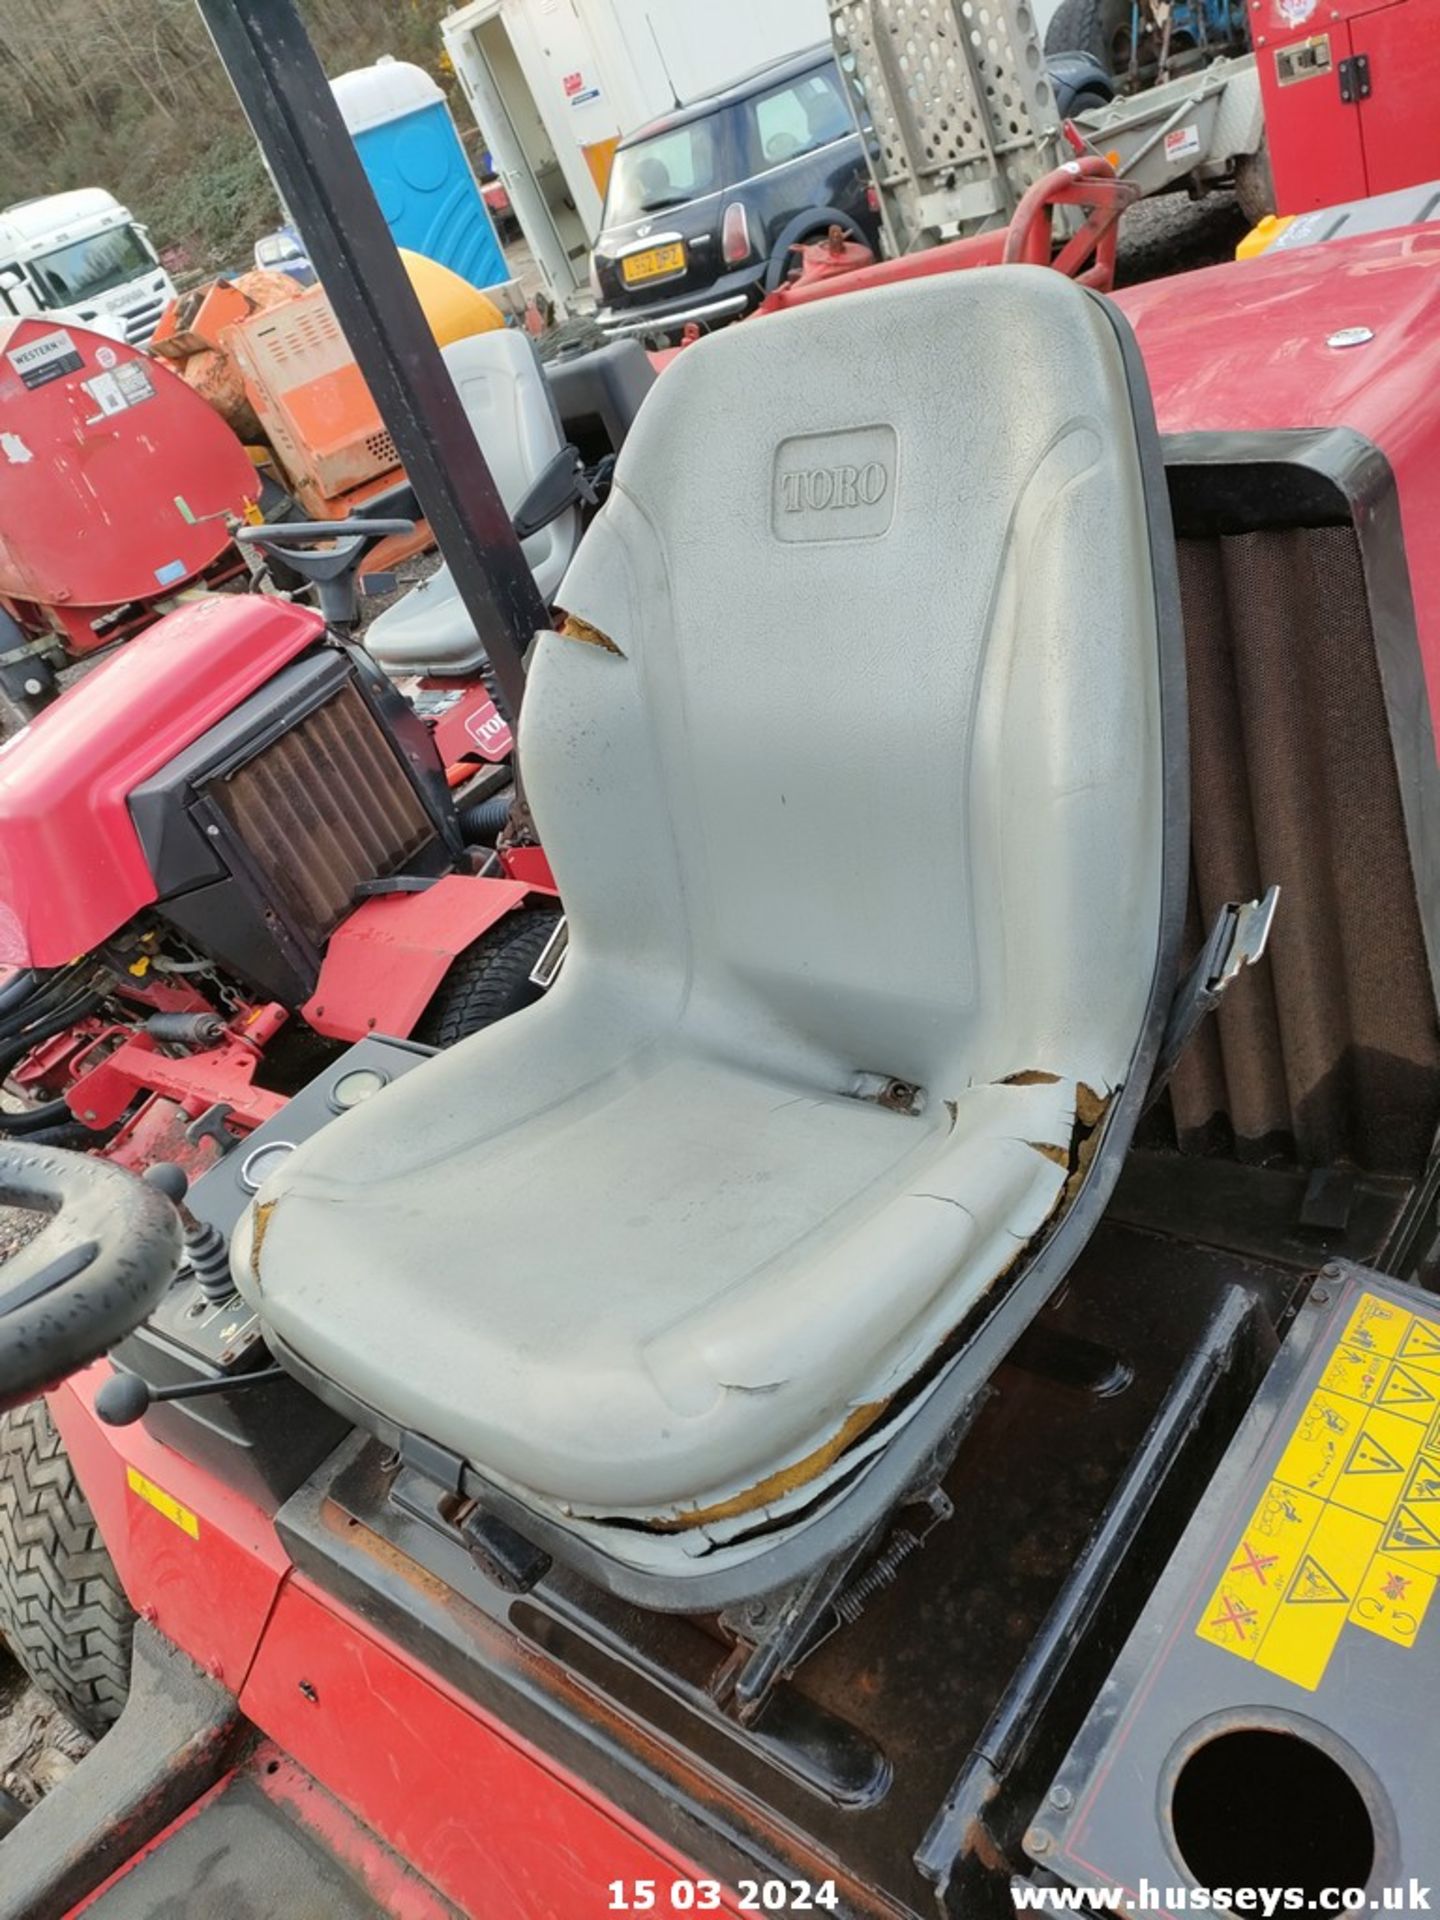 TORO REELMASTER 5500D 5 GANG MOWER (NO KEY BUT WAS DRIVEN INTO PLACE) - Image 6 of 8